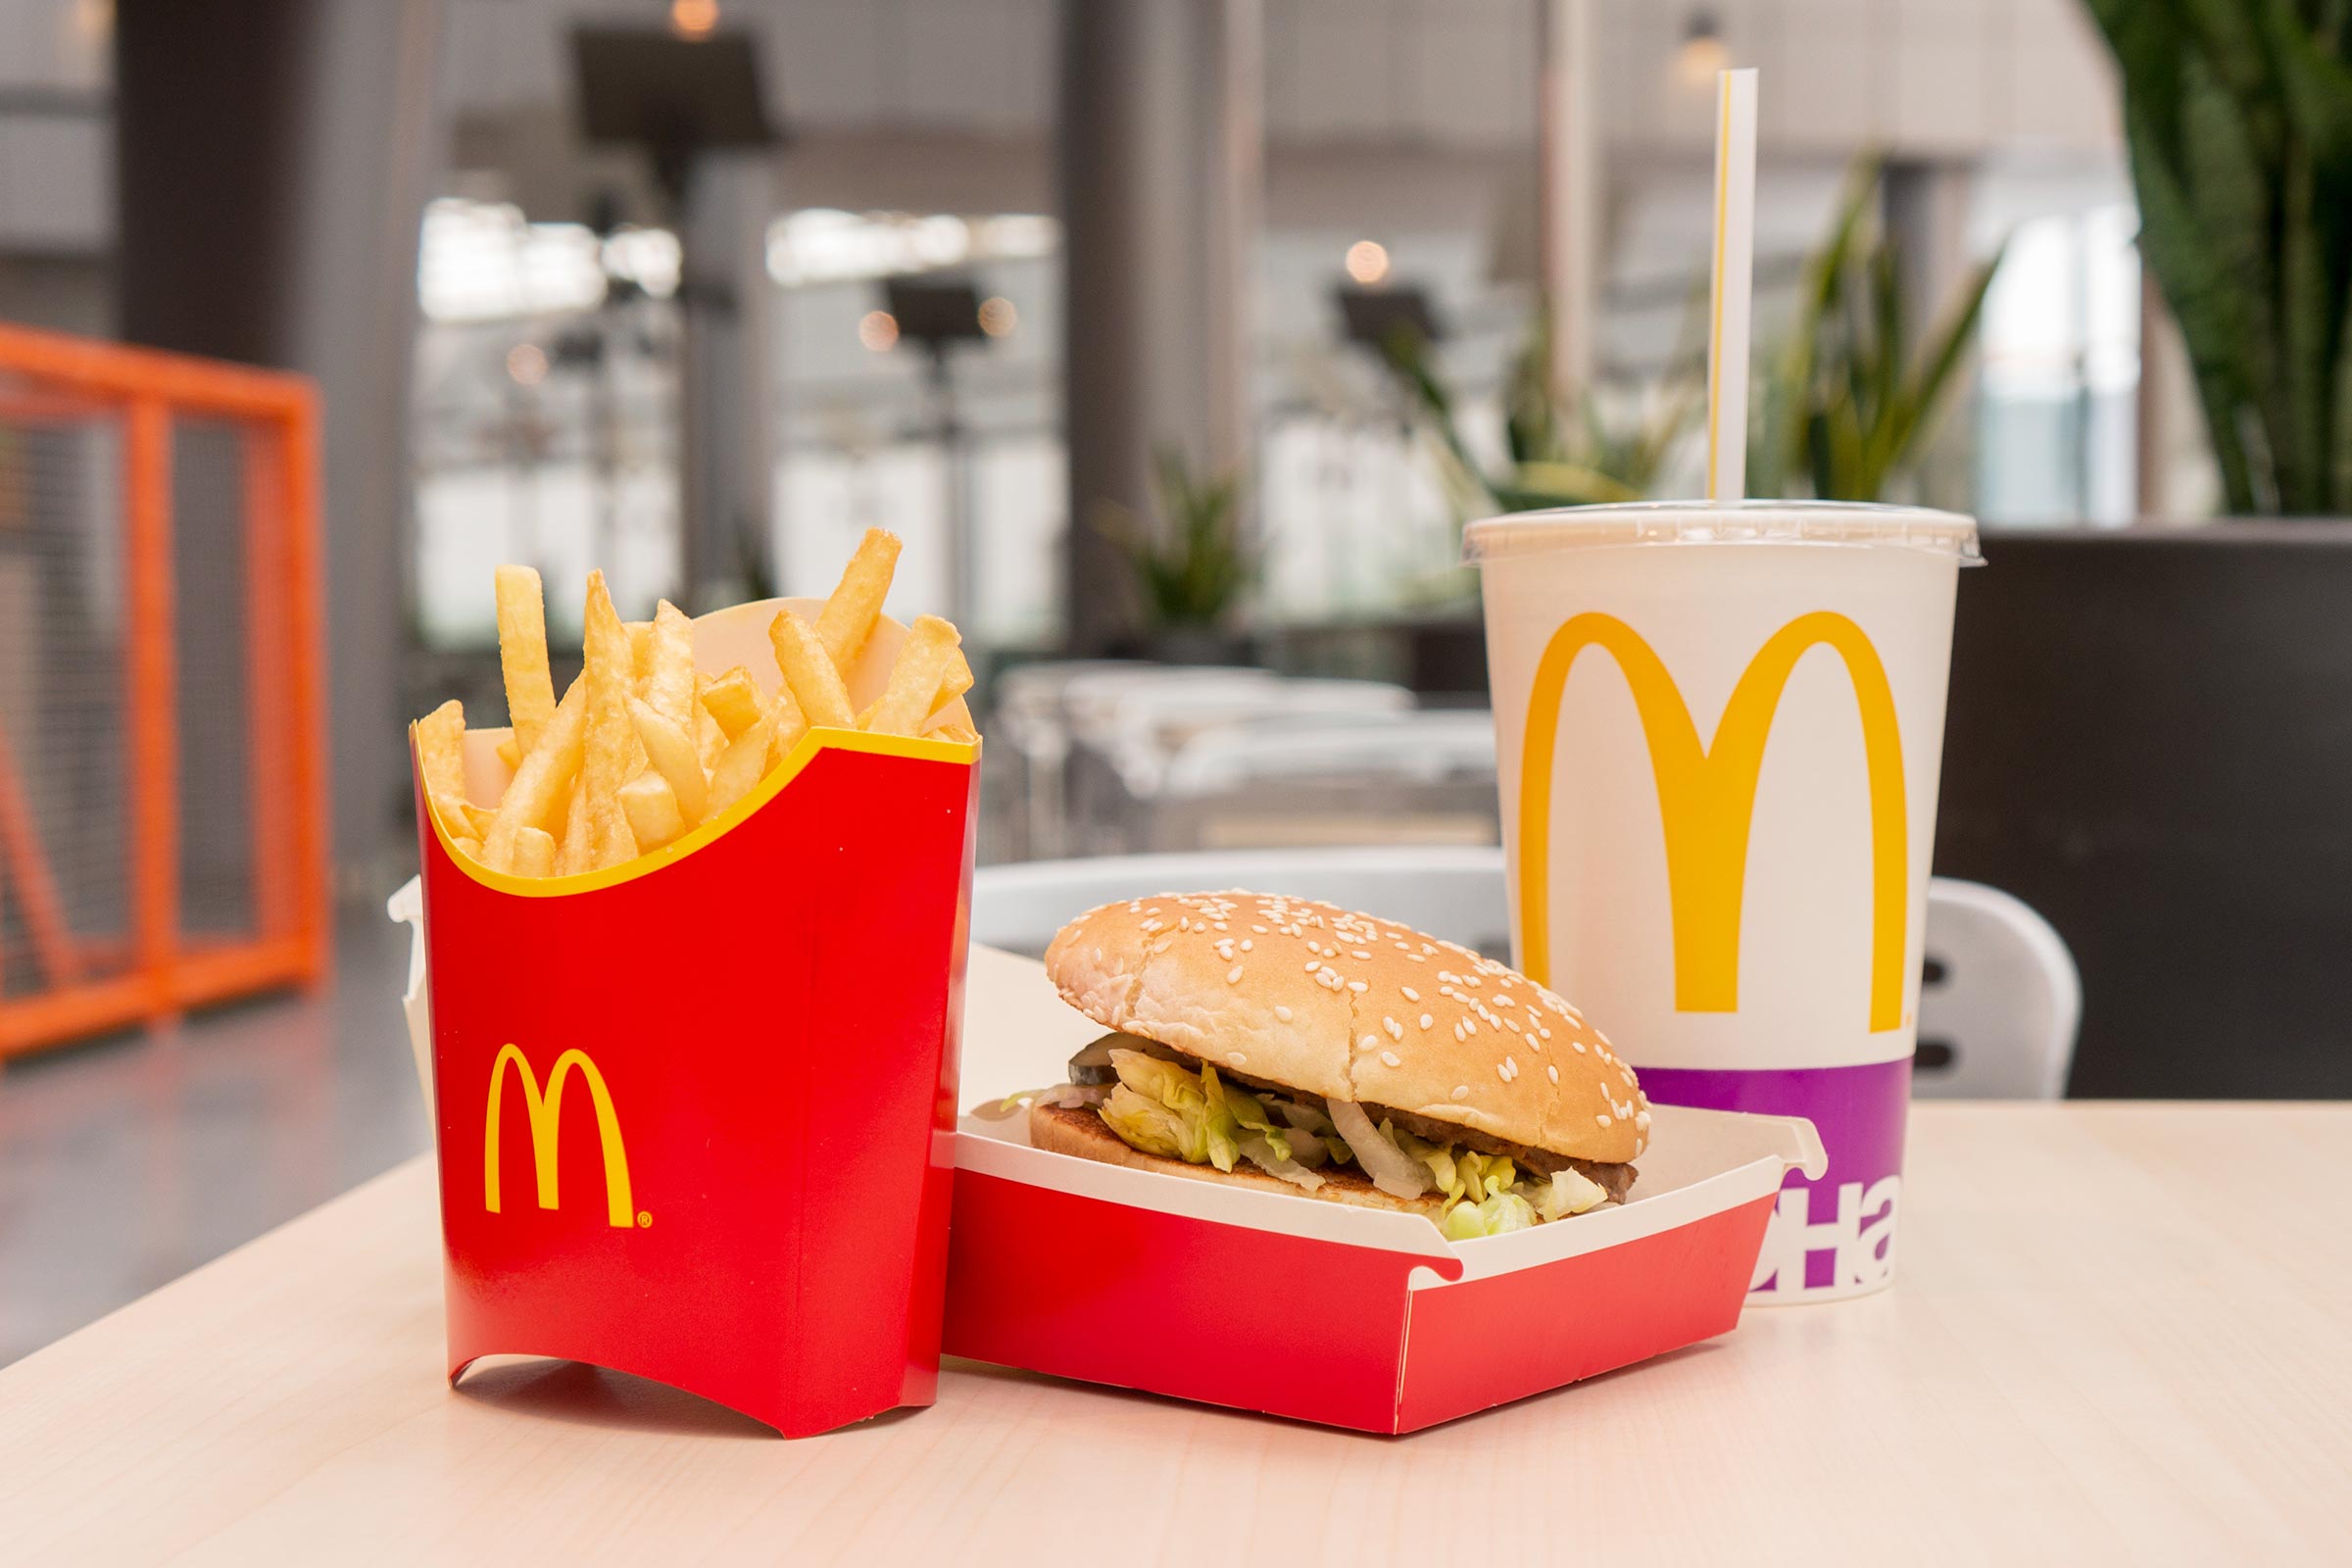 McDonald's global same-store sales down 22% in March as coronavirus pandemic shuts dining areas